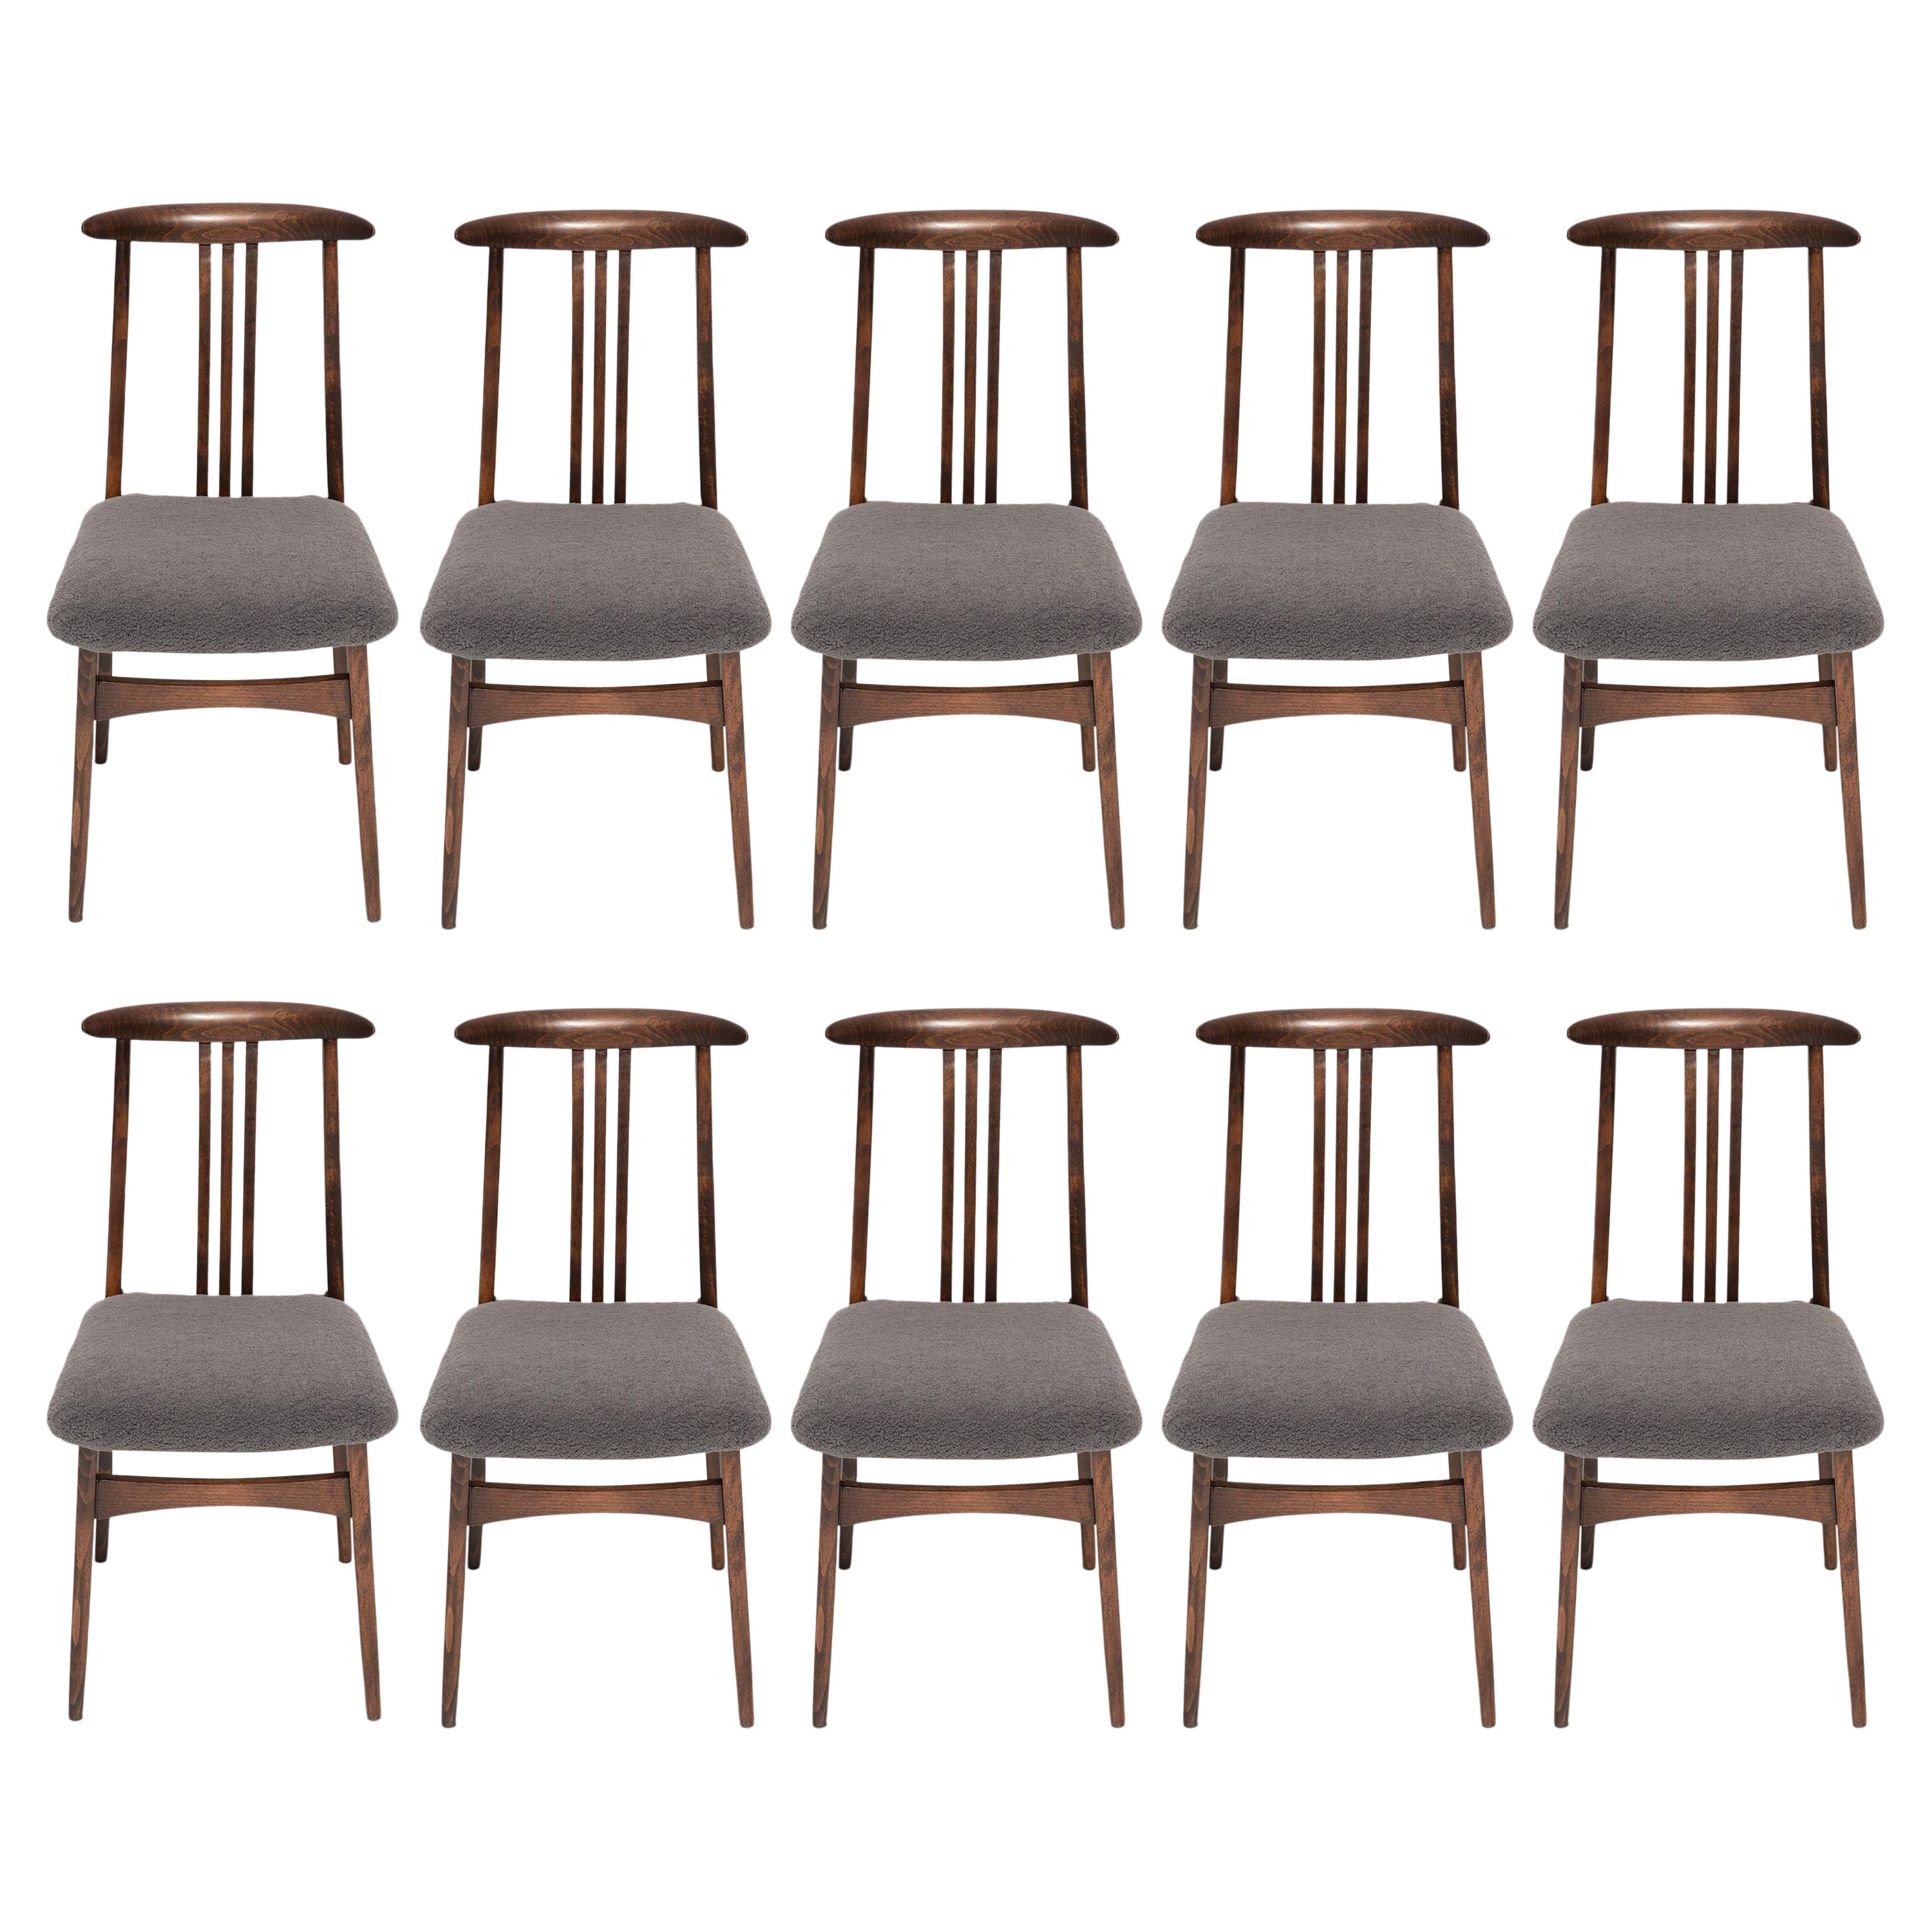 Set of Ten Grey Boucle Chairs, Designed by Zielinski, Europe, 1960s For Sale